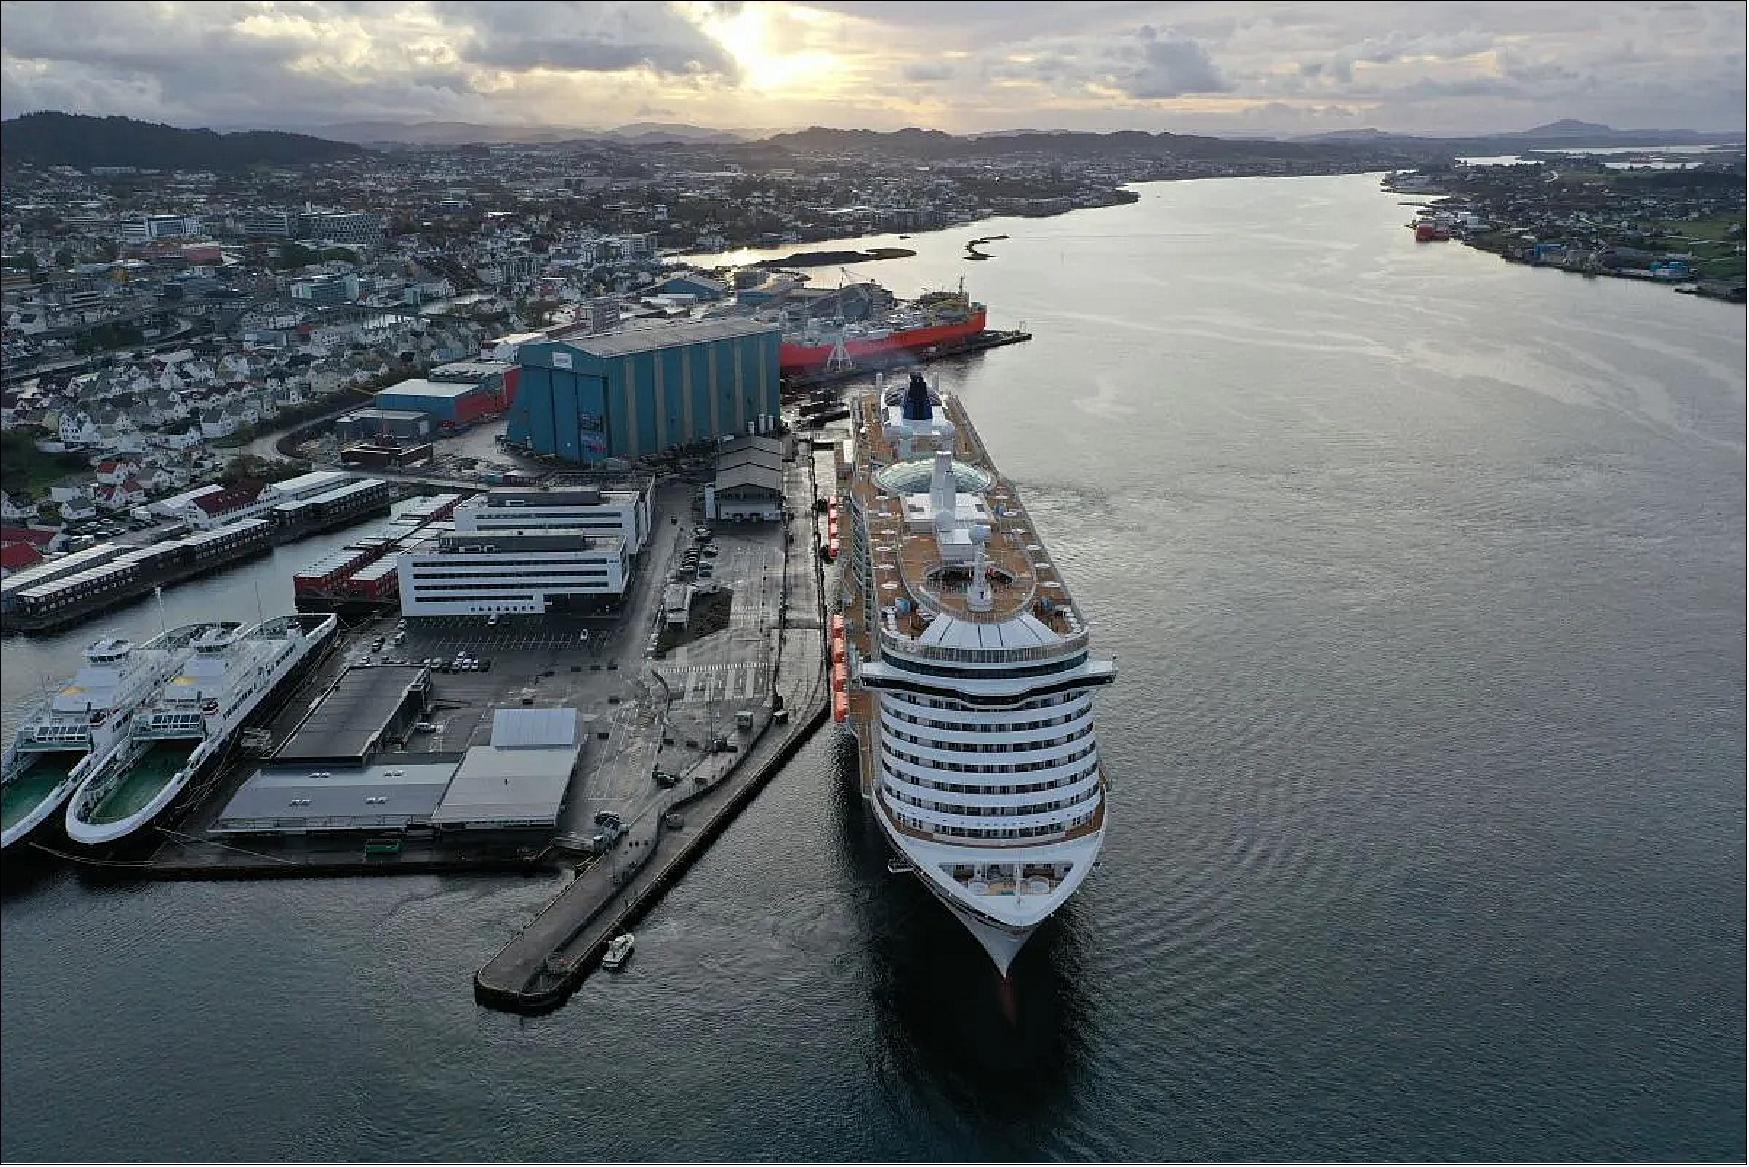 Figure 98: Karmsund Havn. The Norwegian company Havnekraft will establish a new high-voltage shore power system for cruise ships in Haugesund, Norway. The facility will also be prepared for other vessels visiting the port outside the cruise season, providing a highly flexible solution for the port and visiting vessels. Planned delivery of the facility is the end of 2022 (image credit:, Havnekraft, VPO)